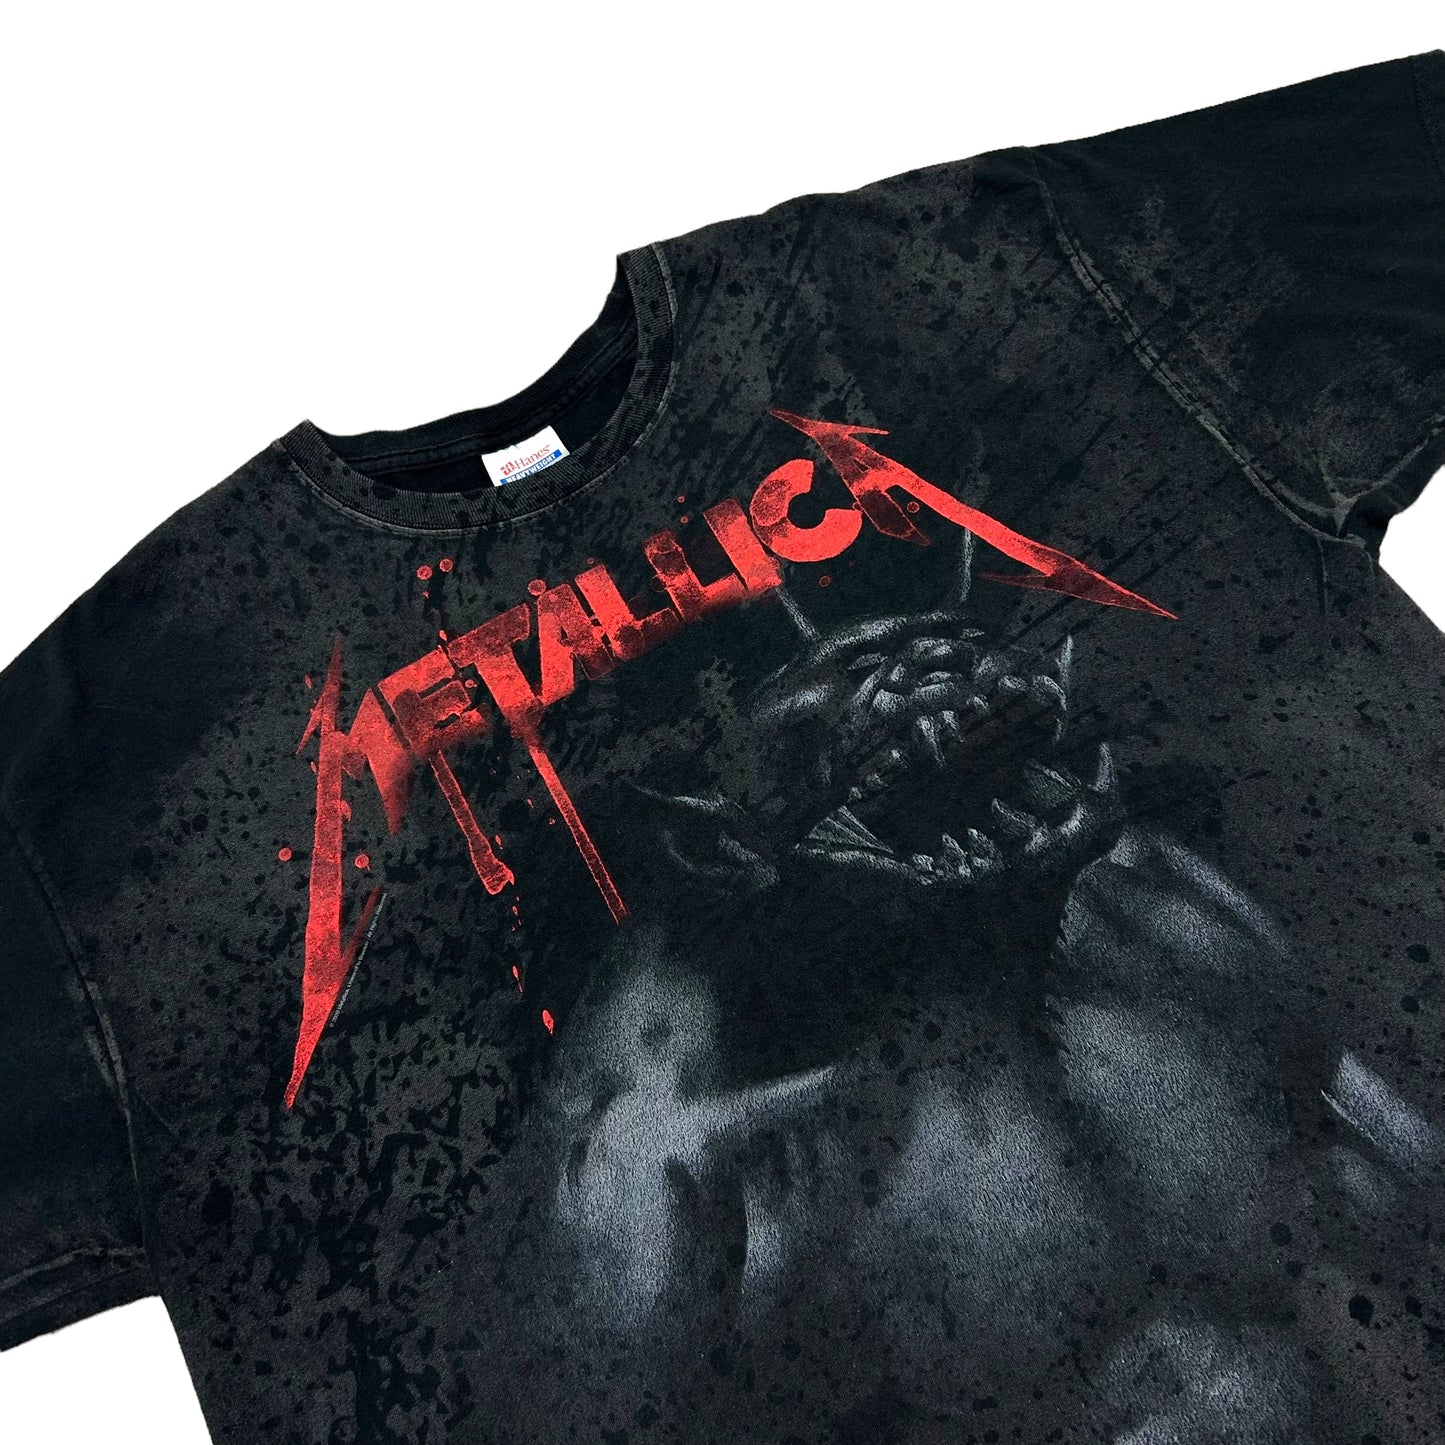 Late 2000s Metallica “Jump In The Fire” Black All Over Print Graphic T-Shirt - Size XXL (Fits Boxy XL)